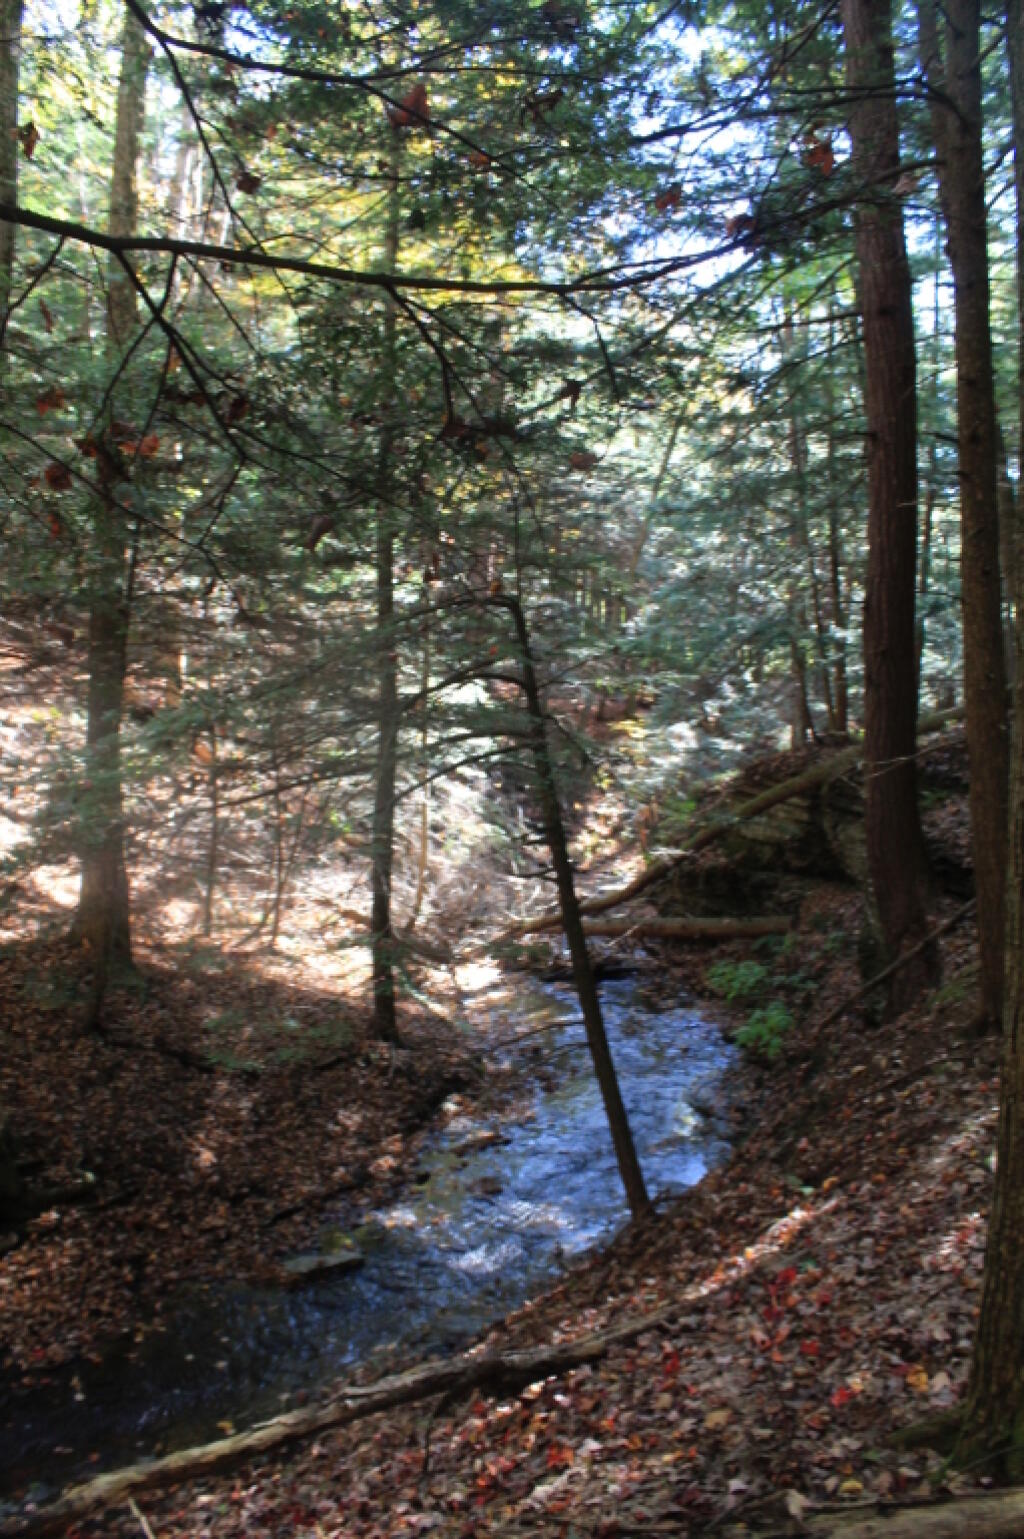 Tributary of the Dry Creek